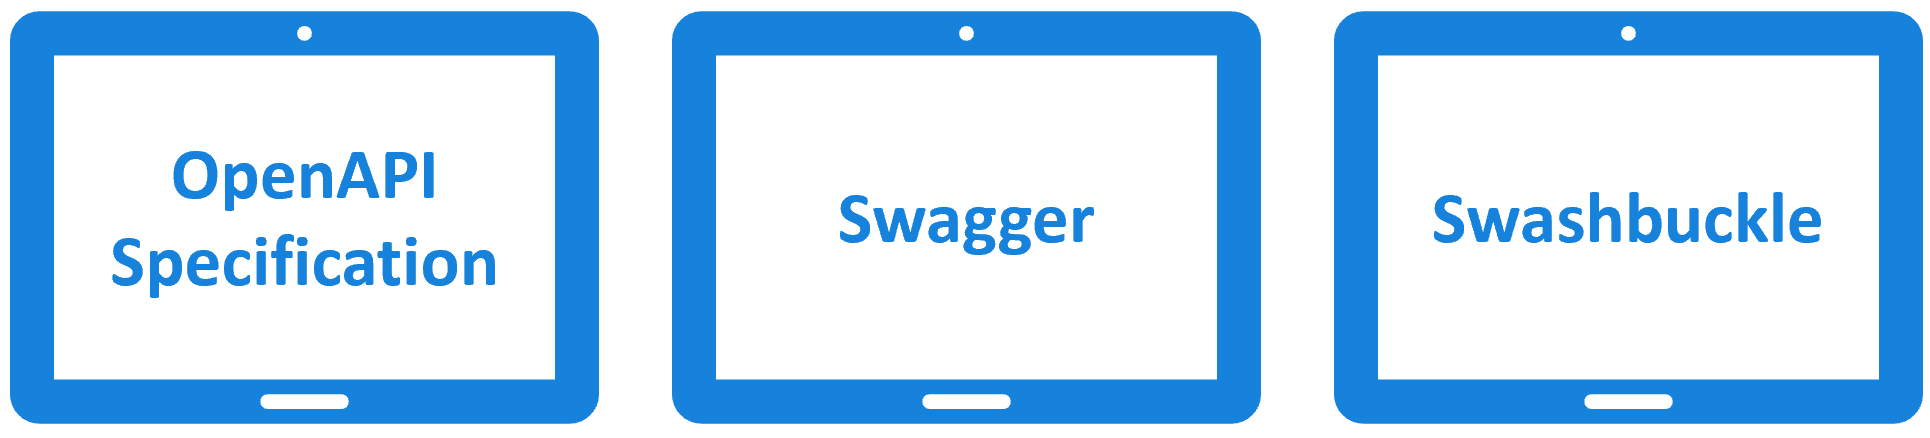 asp.net core swagger example